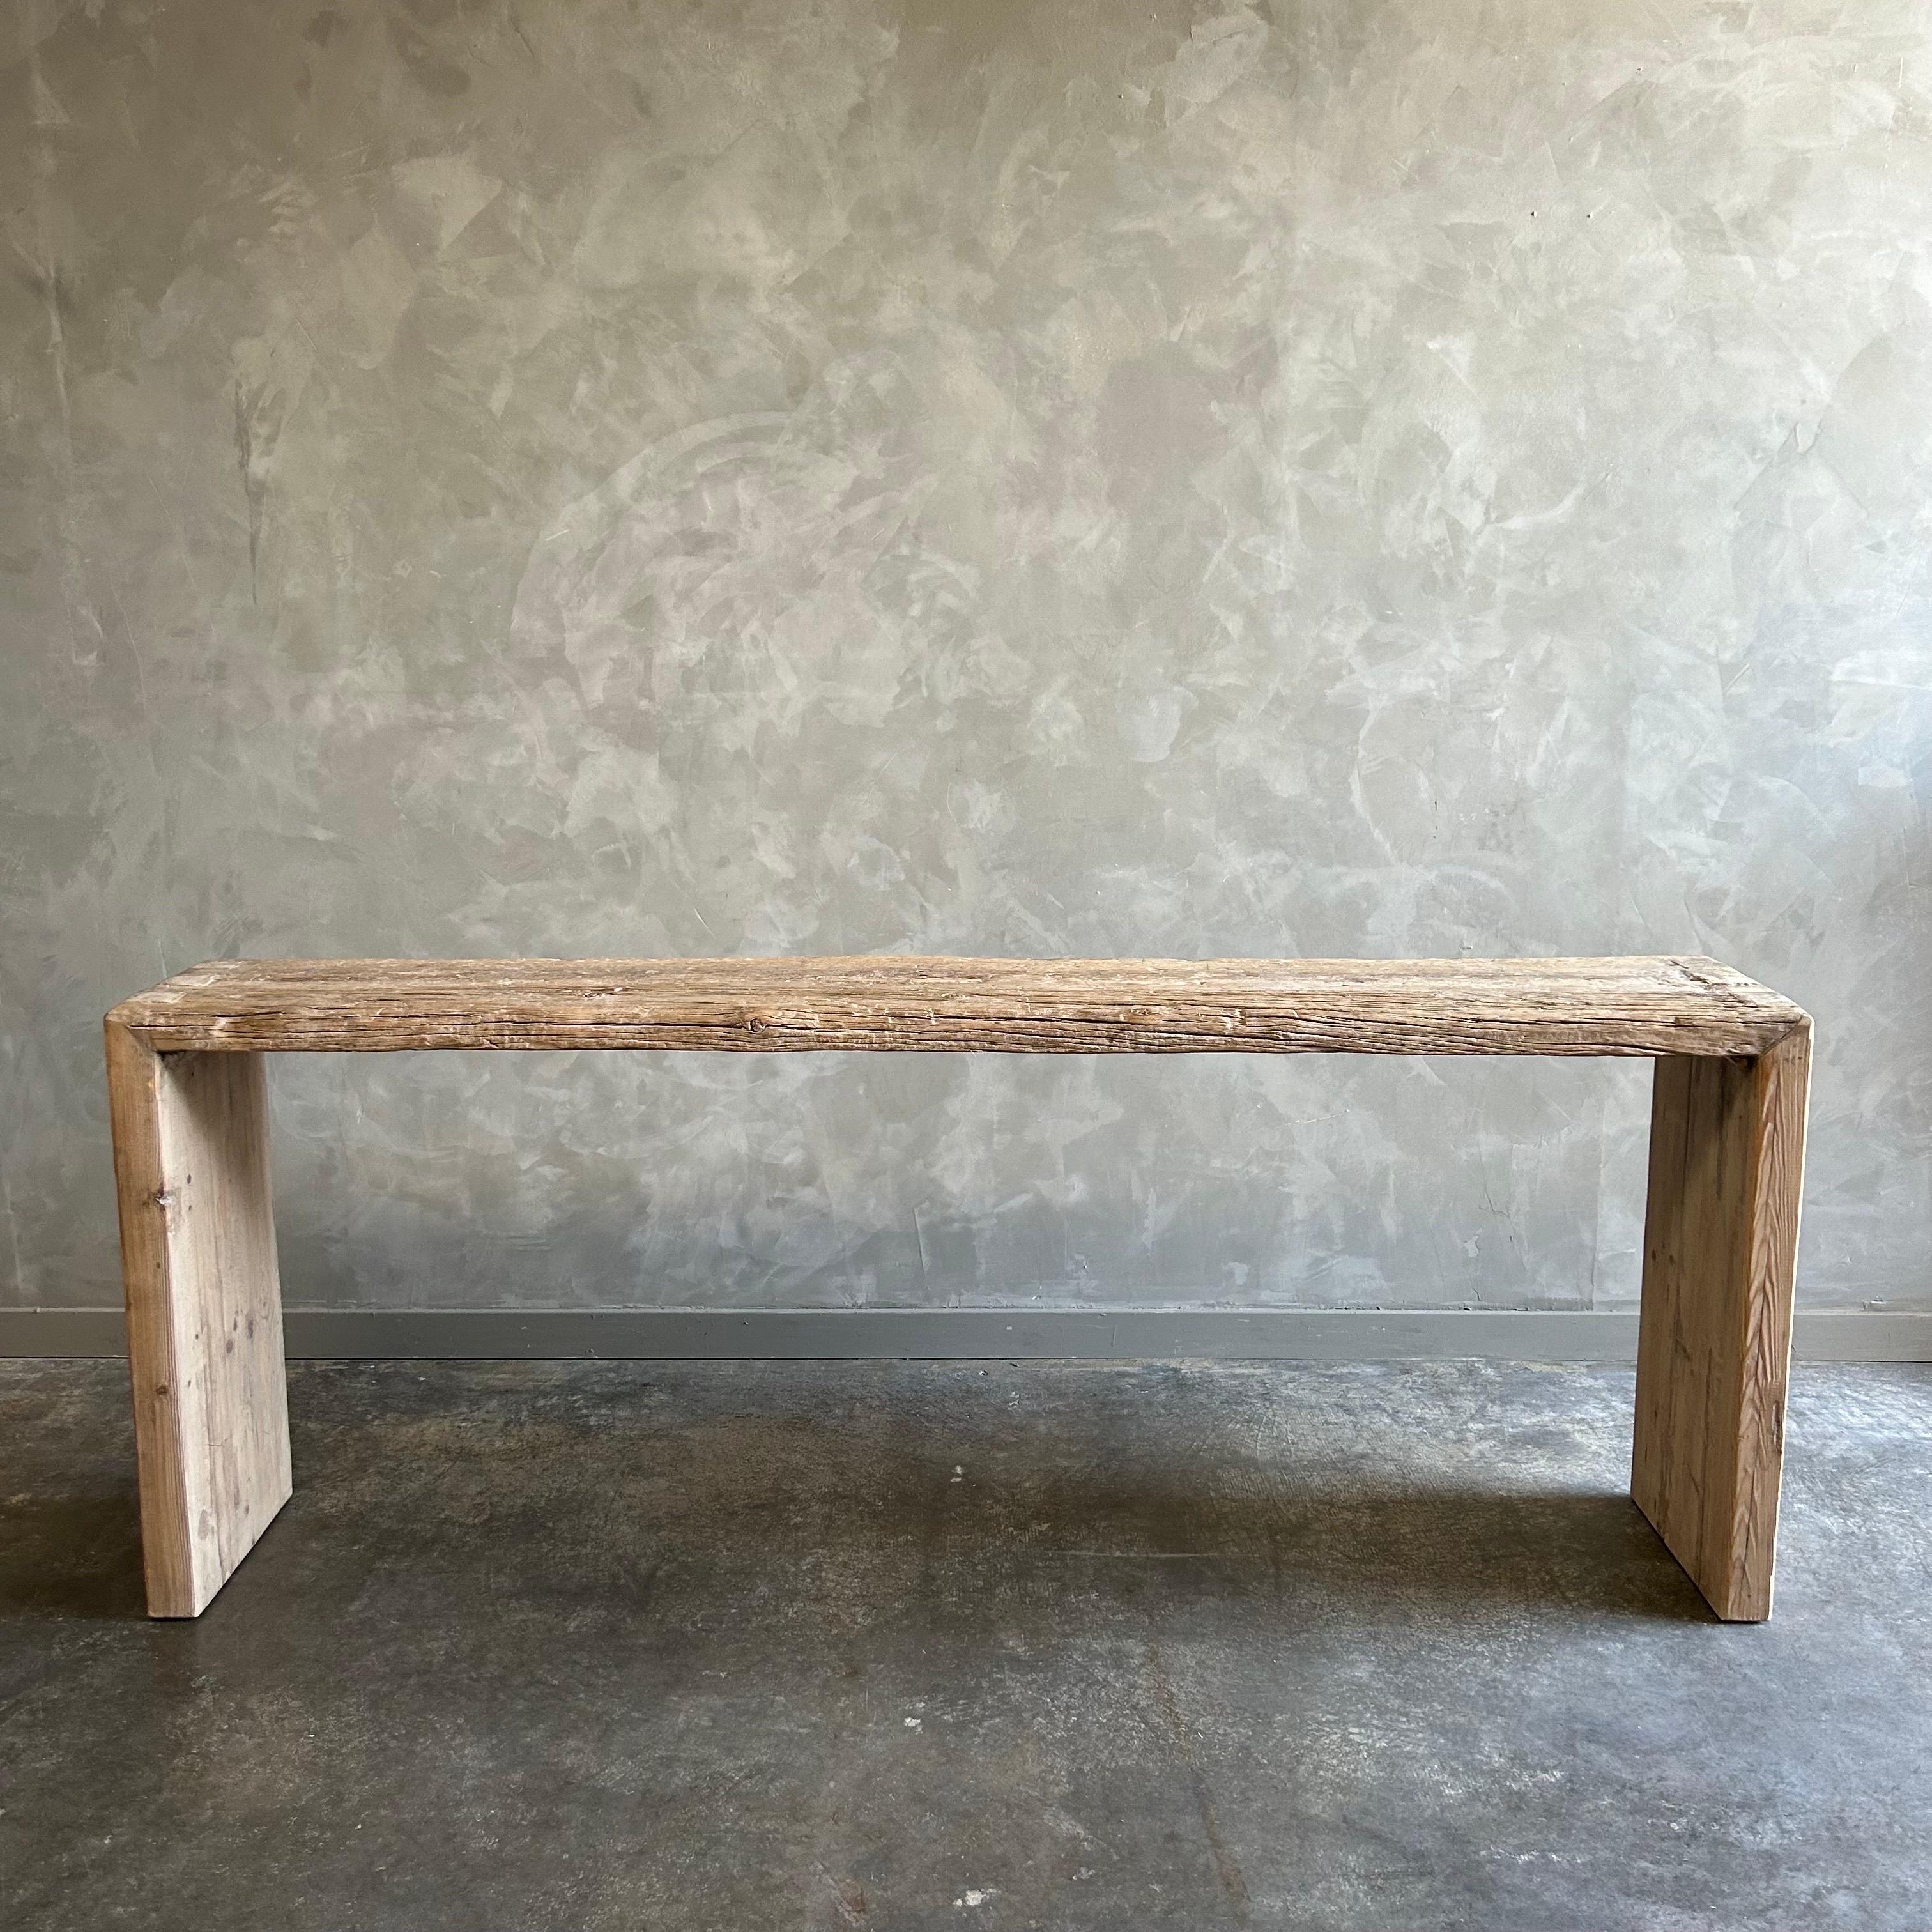 Modena Vintage Console
These old elm timbers show in its most primal, natural form. The artisanal construction methods highlight the elm woods beautiful grain pattern & knots and fissures from its past life. The most authentic materials are hand